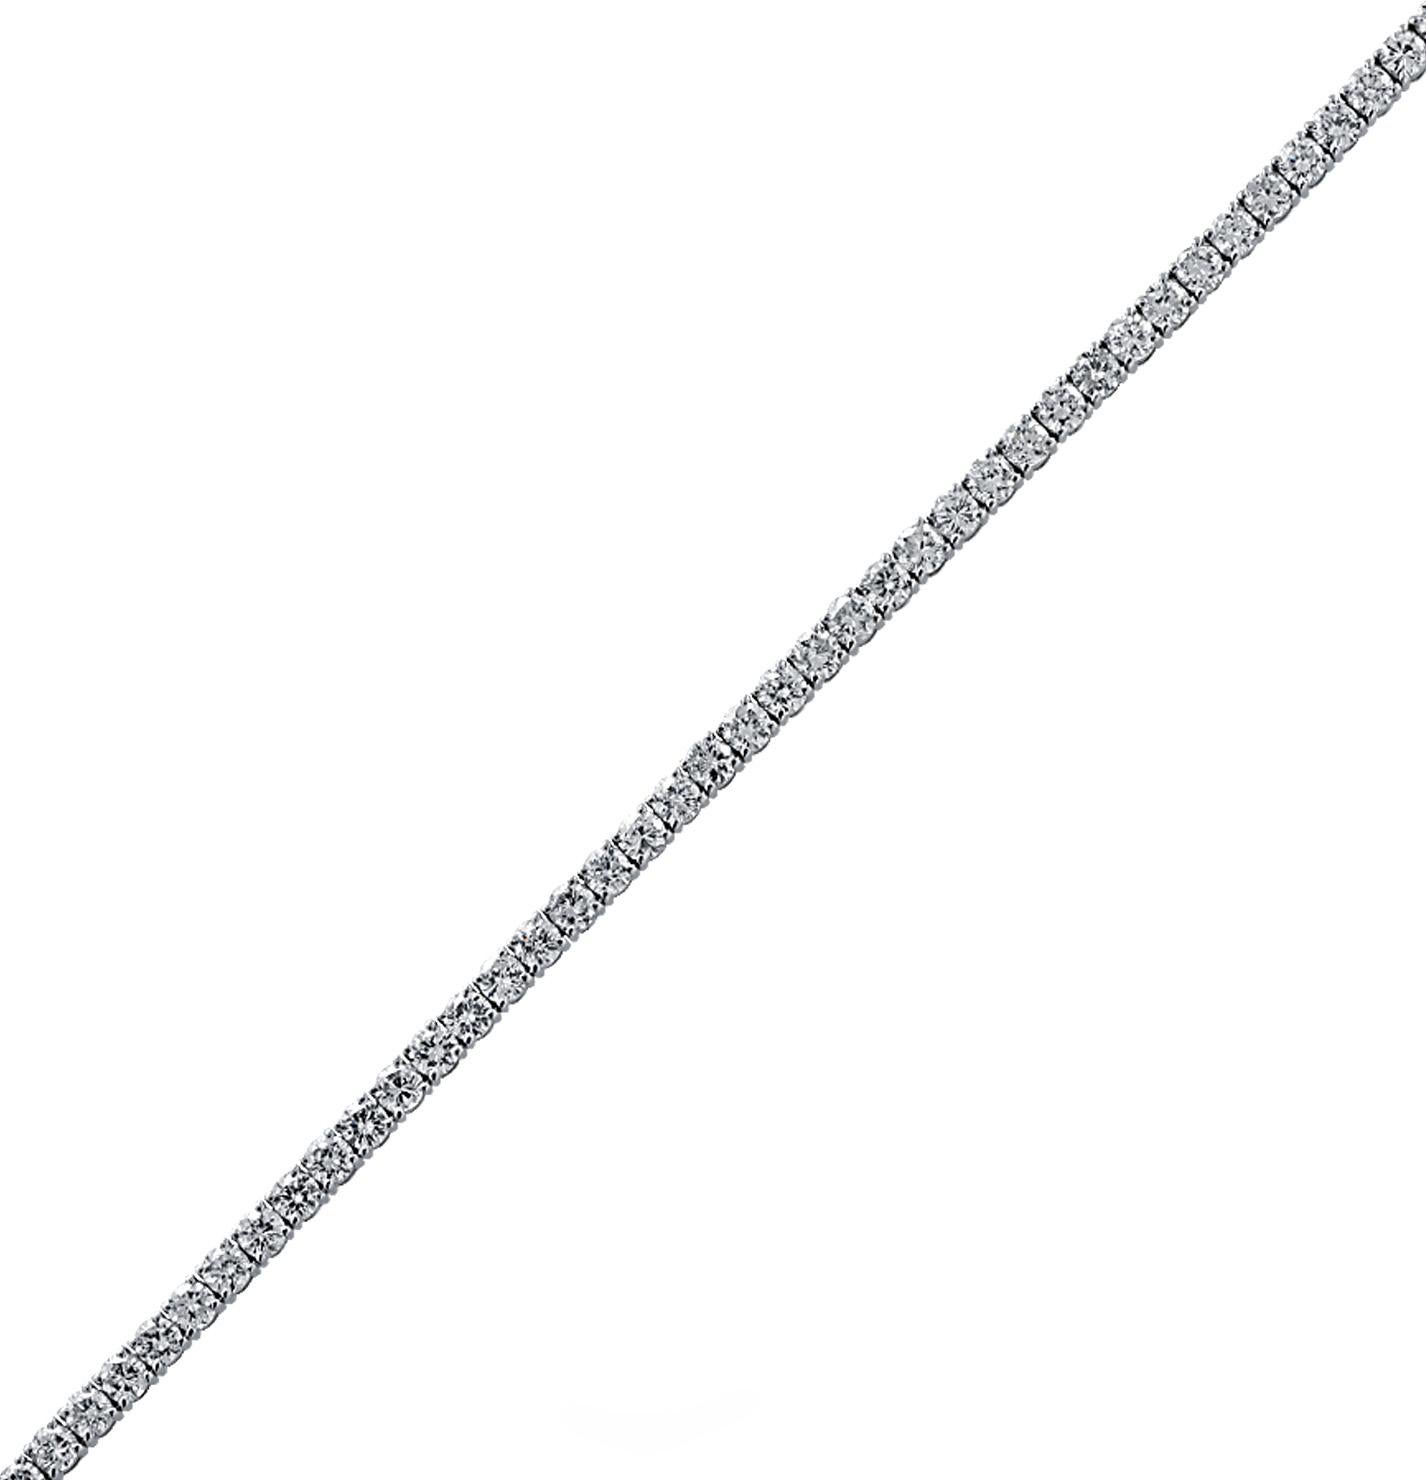 Exquisite Vivid Diamonds diamond tennis bracelet crafted in 18 karat white gold, showcasing 62 stunning round brilliant cut diamonds weighing 5.51 carats total, G-I color, SI clarity. Each diamond is carefully selected, perfectly matched and set in